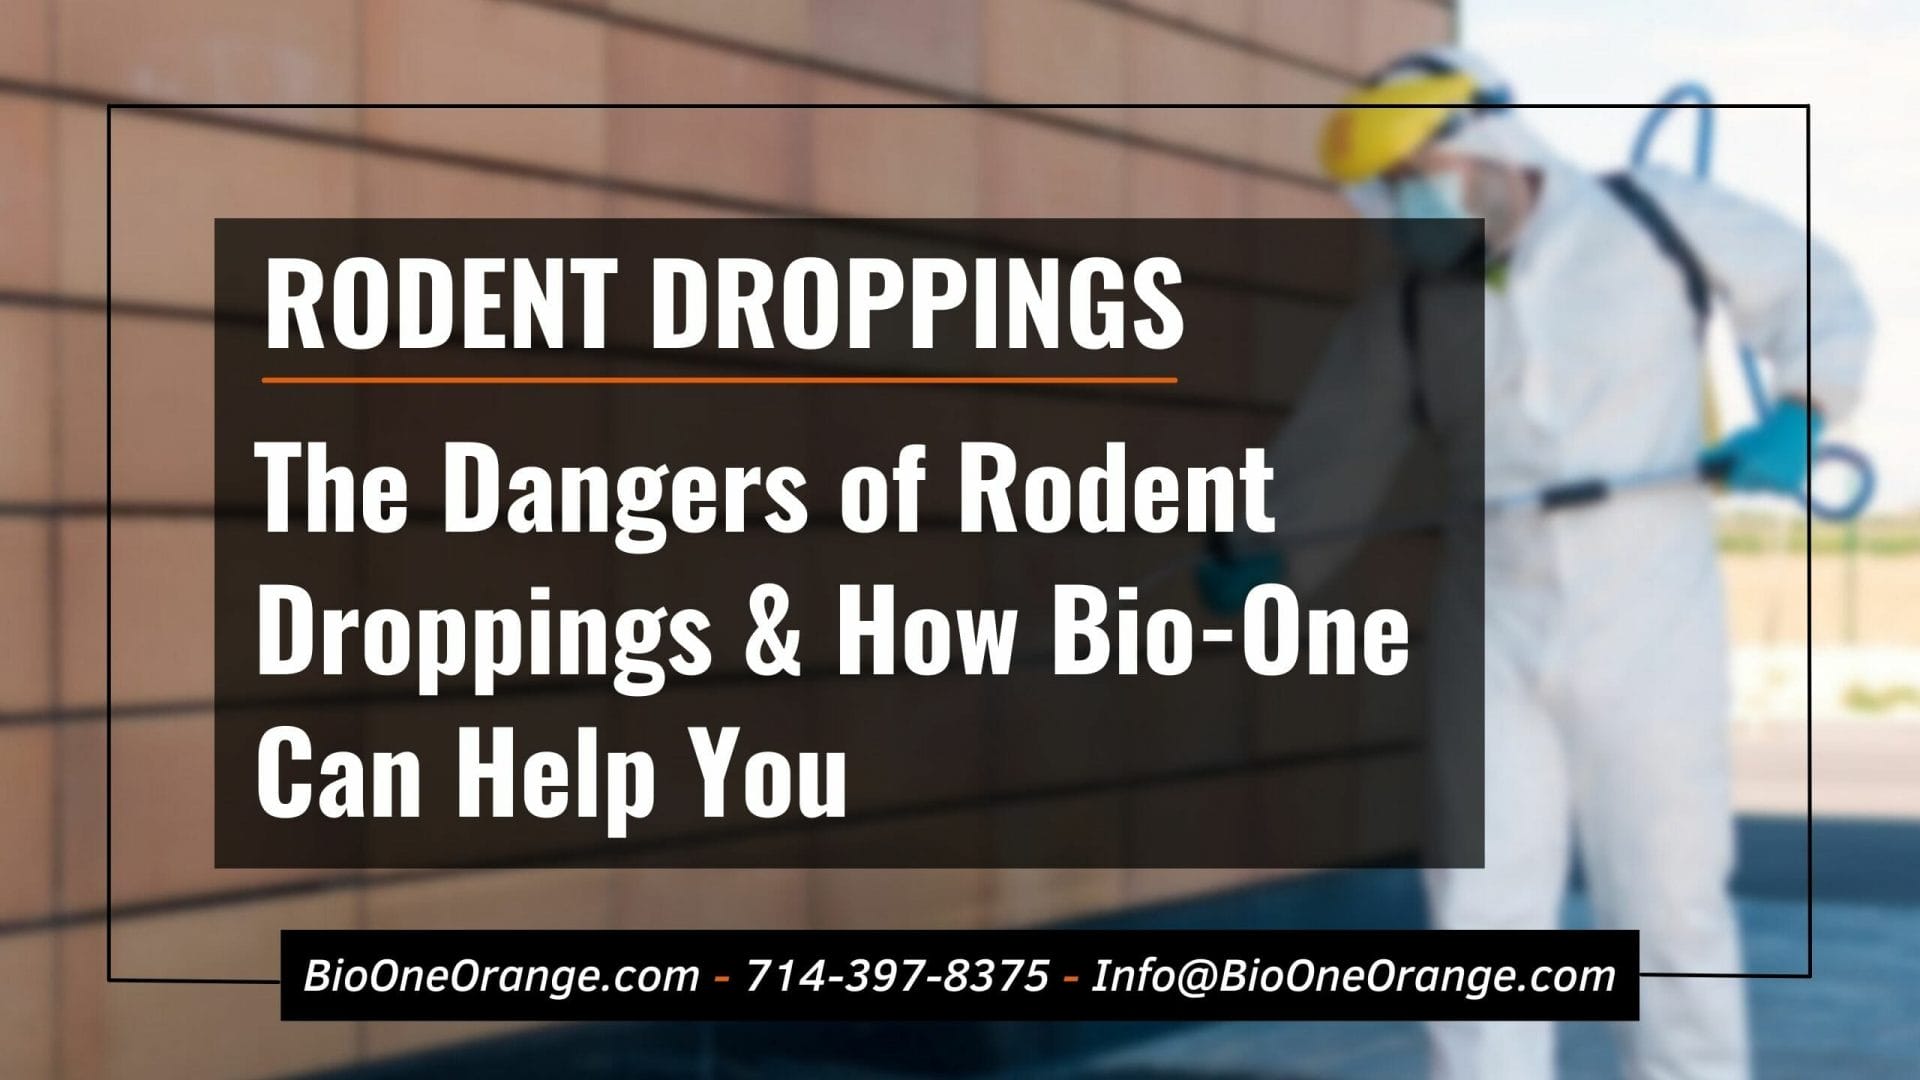 The Dangers of Rodent Droppings & How Bio-One Can Help You